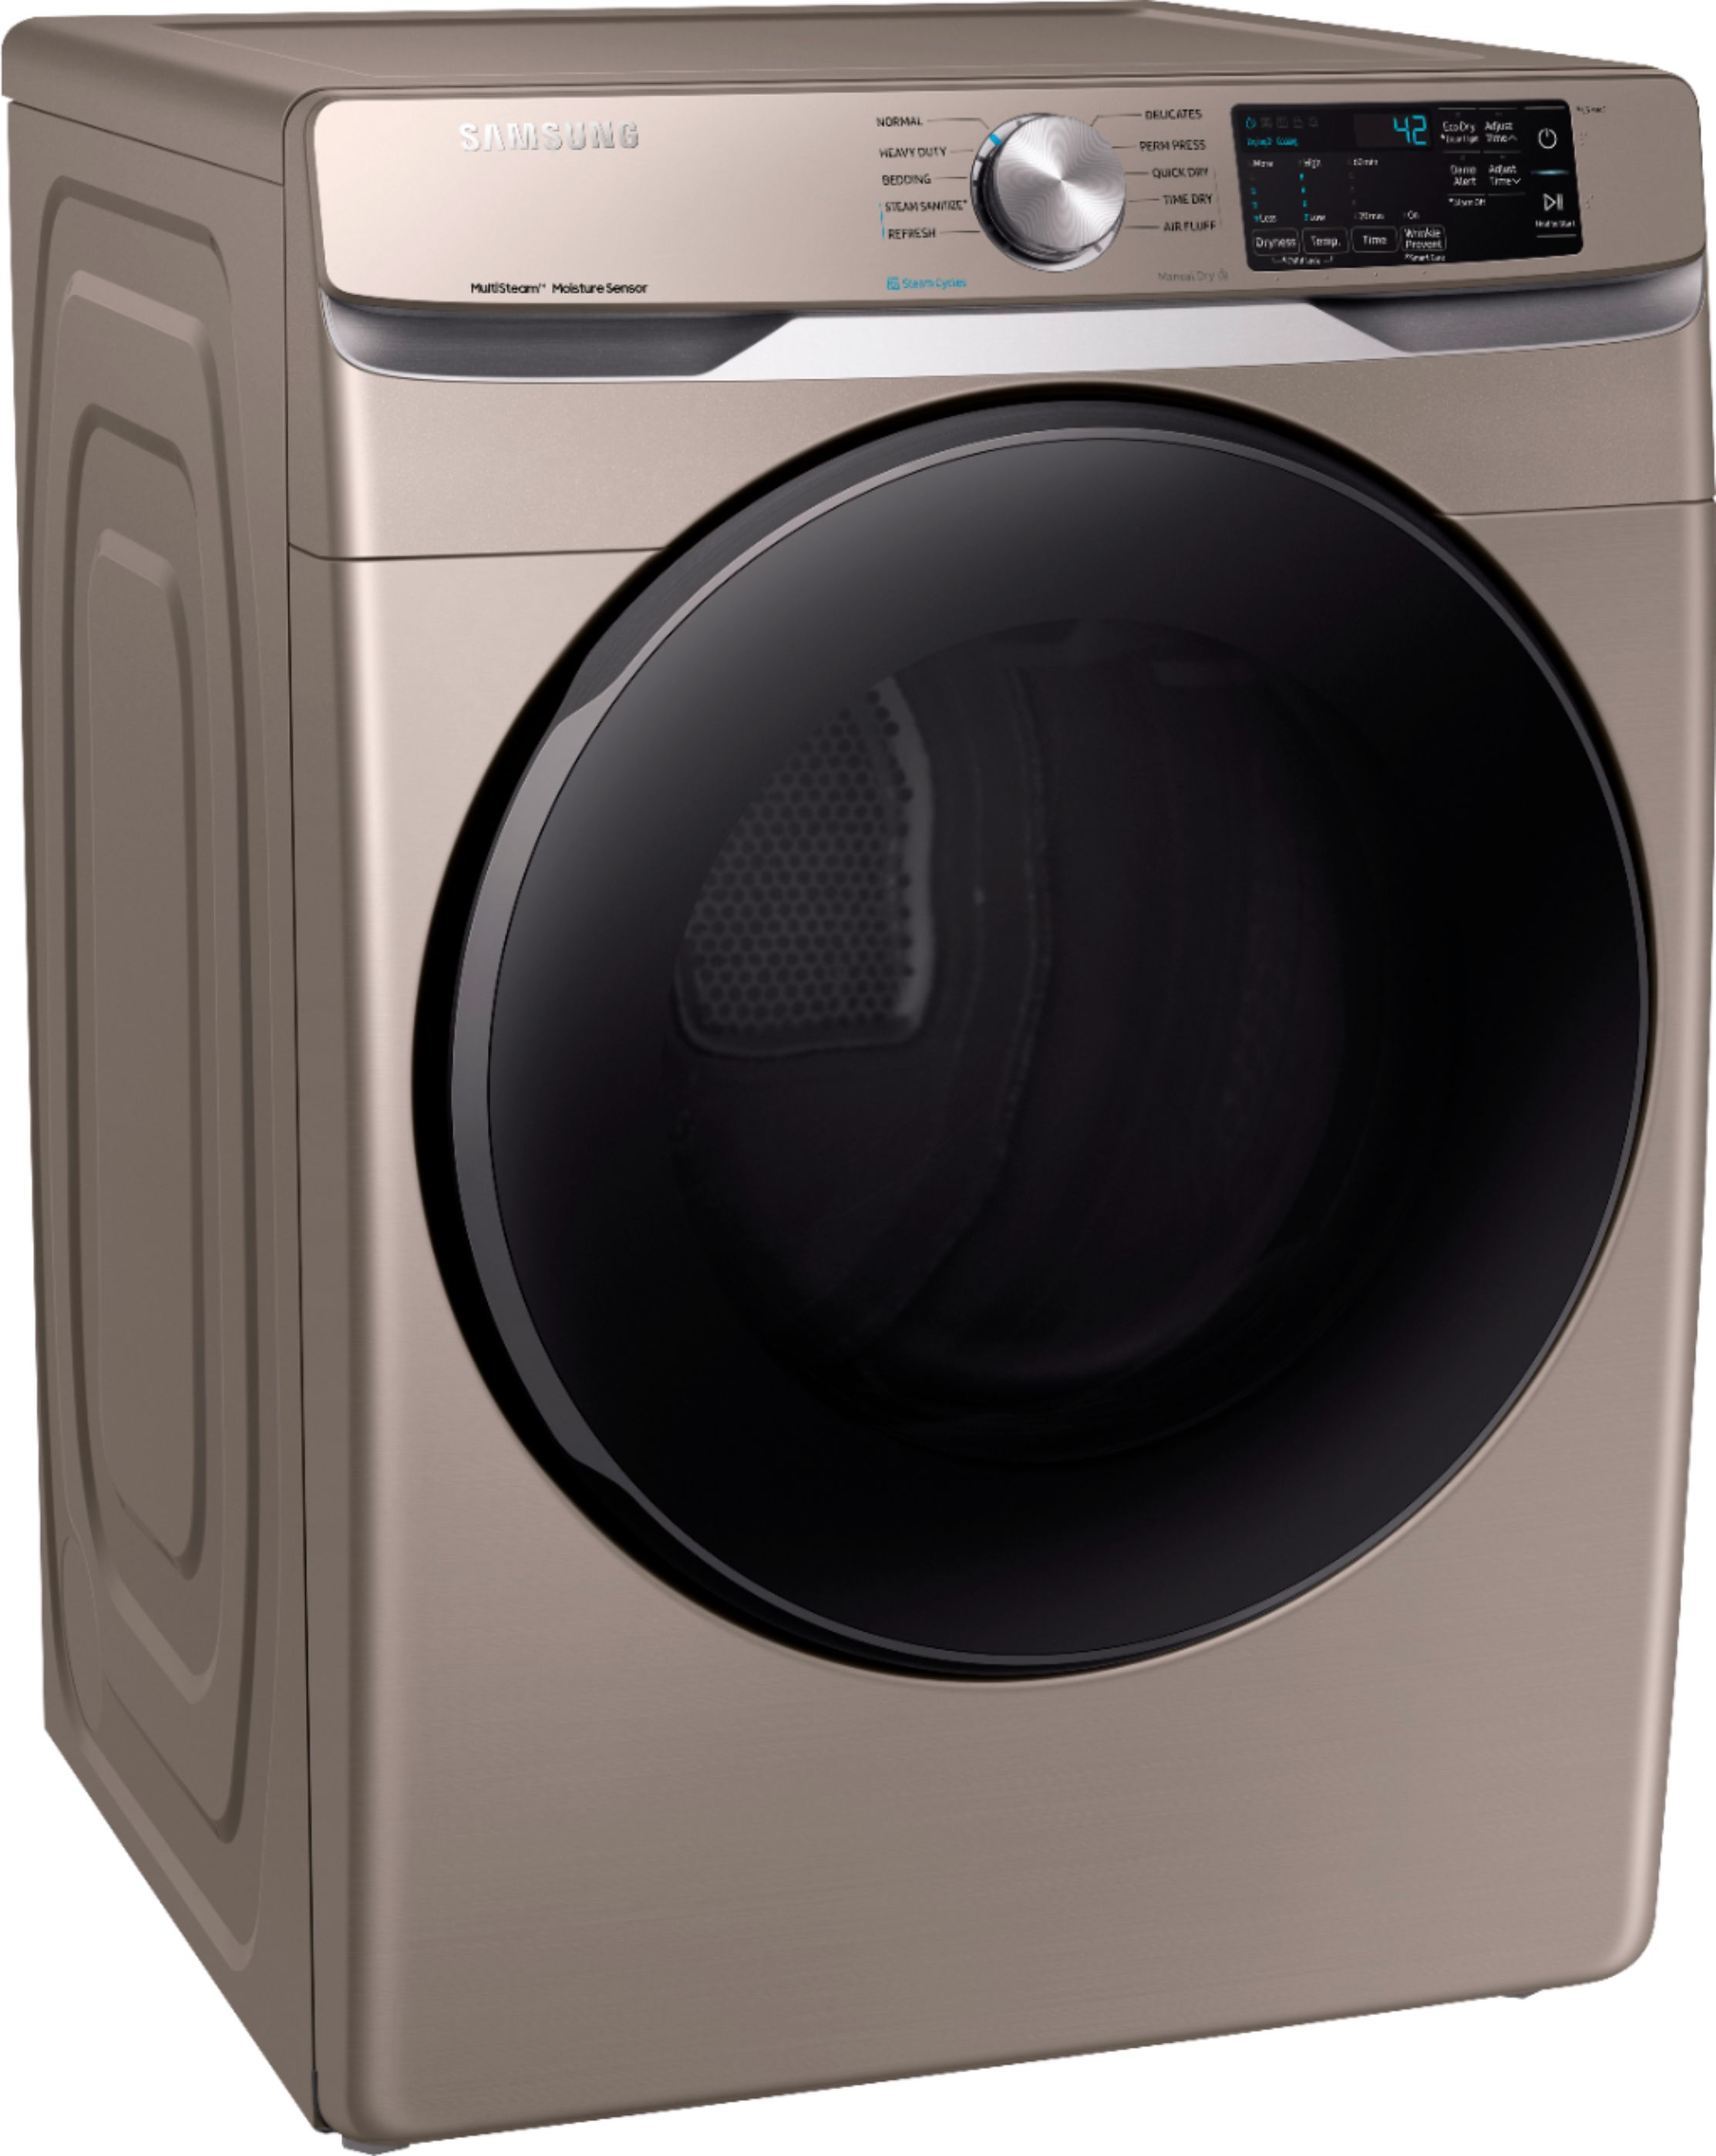 Angle View: Samsung - 7.5 Cu. Ft. Stackable Gas Dryer with Steam and Sensor Dry - Champagne